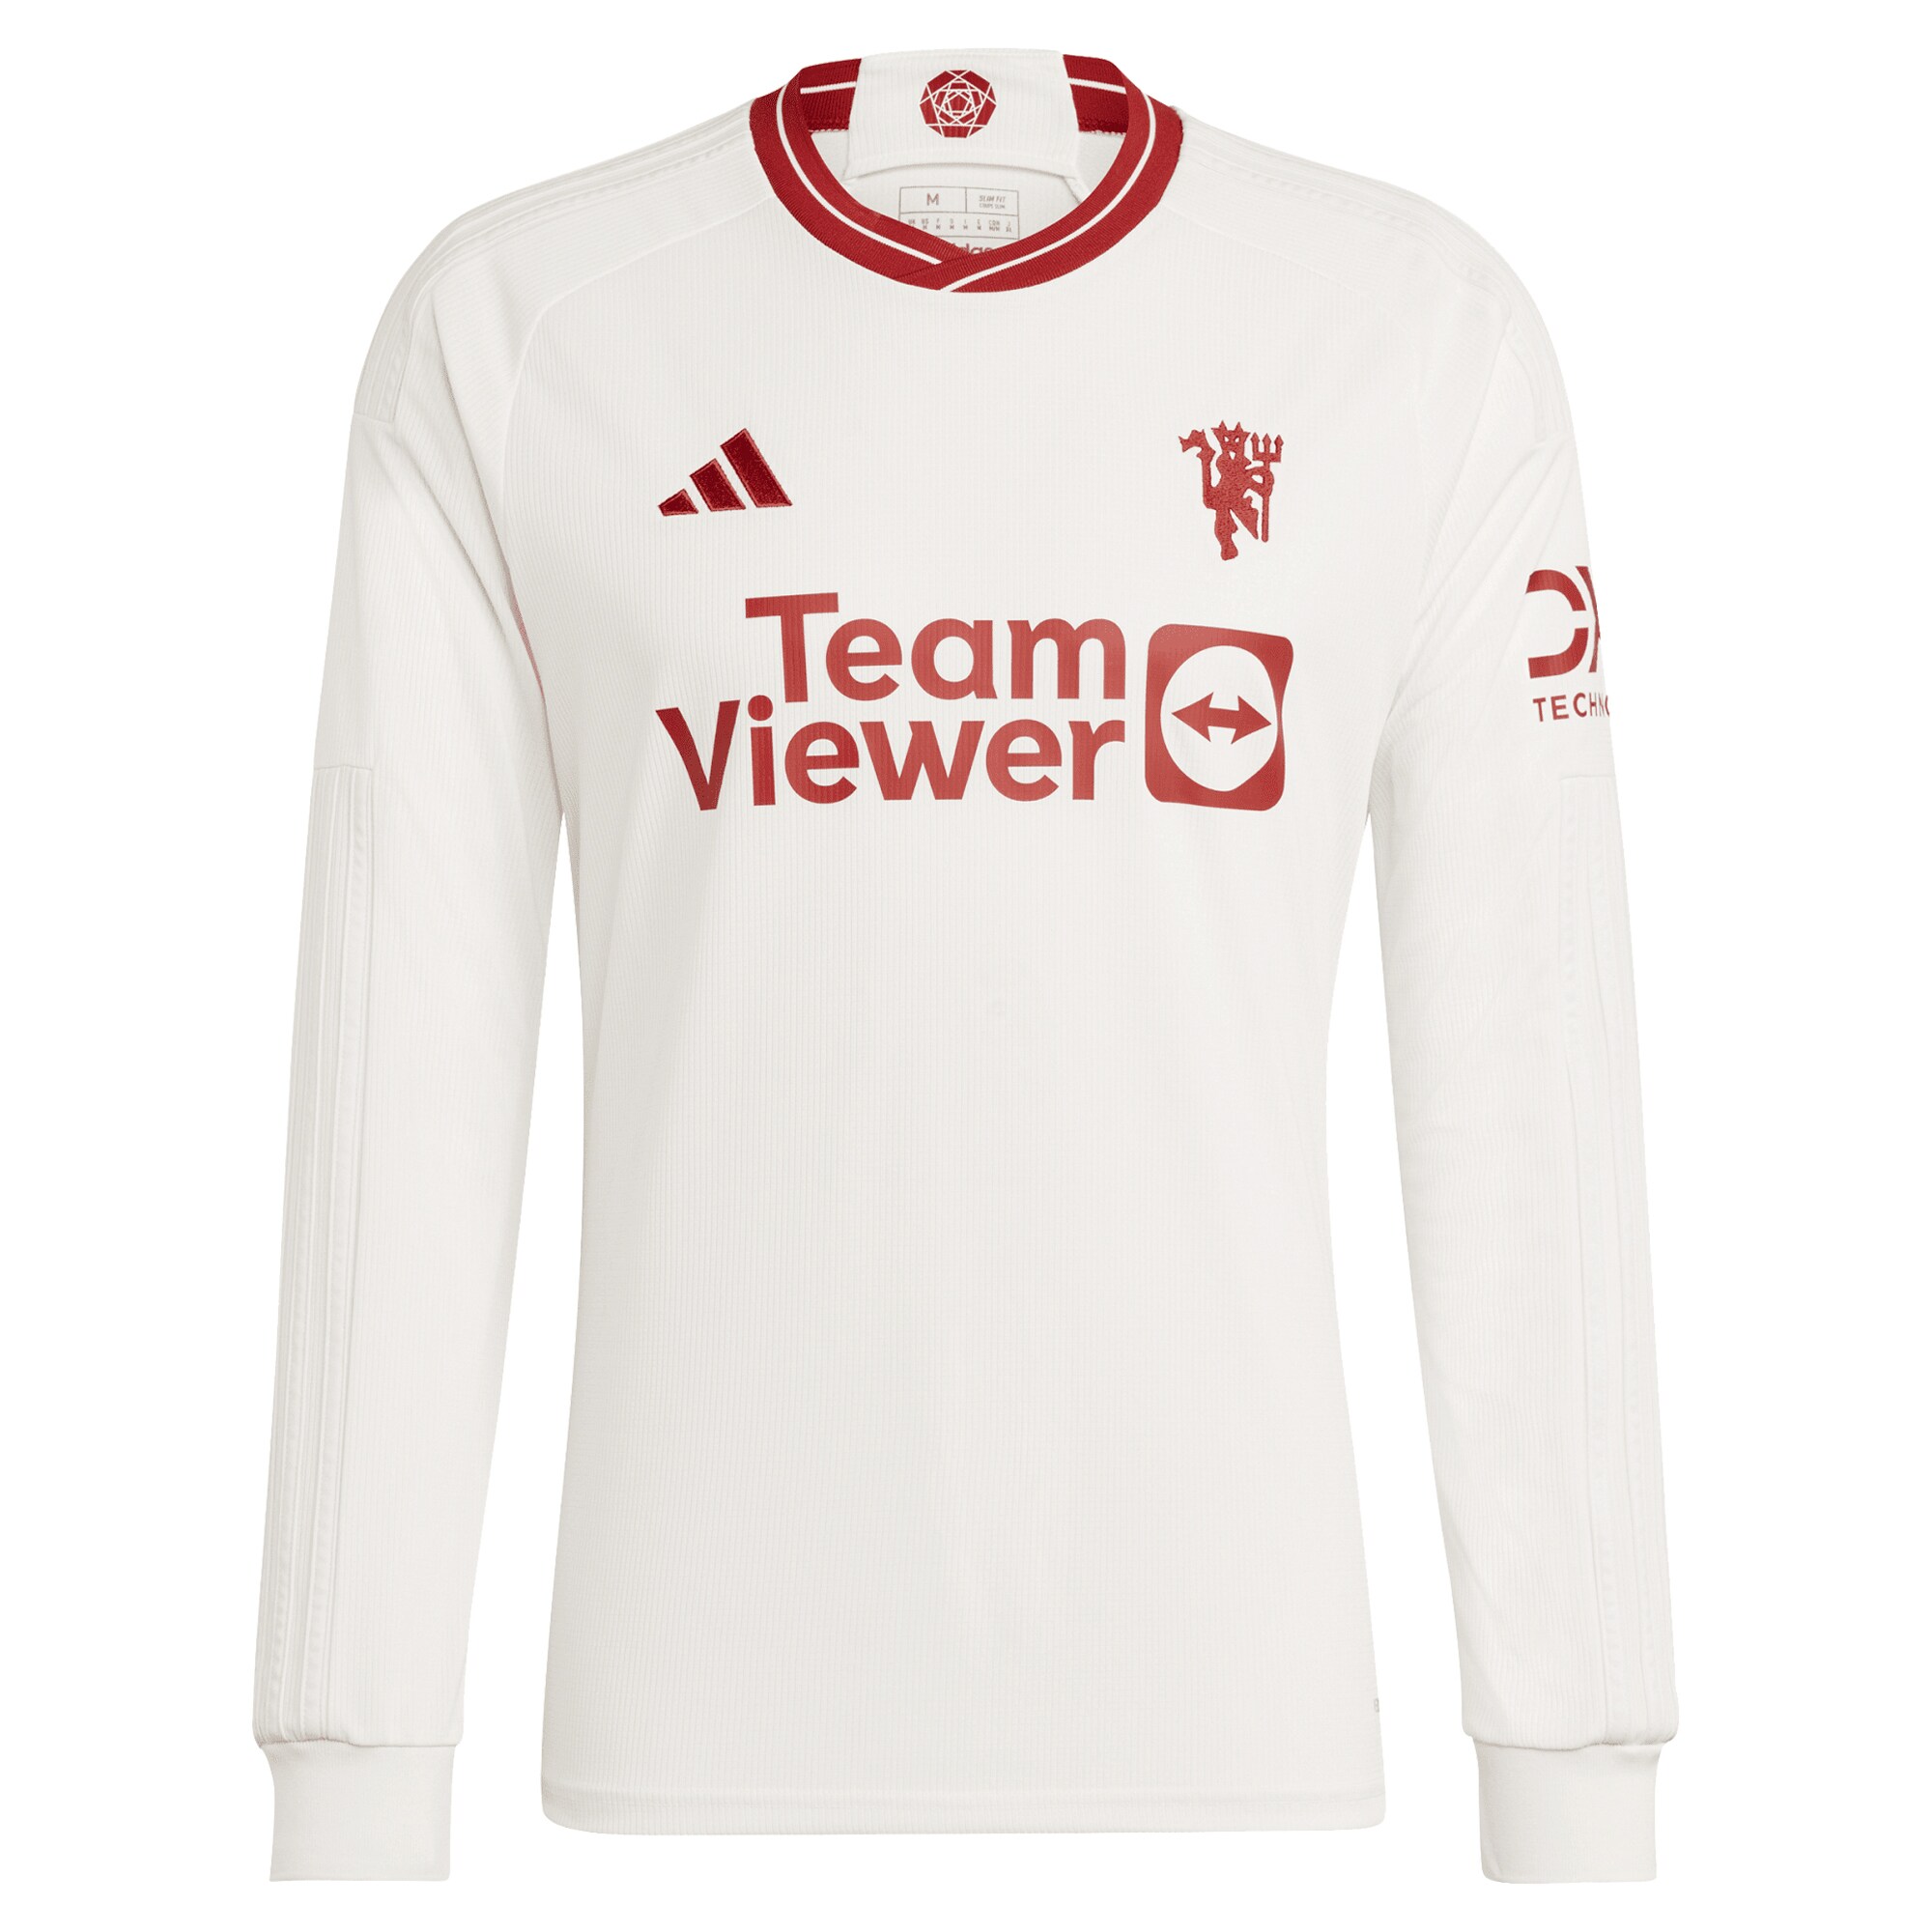 Manchester United EPL Third Shirt 2023-24 Long sleeve with Reguilón 15 printing